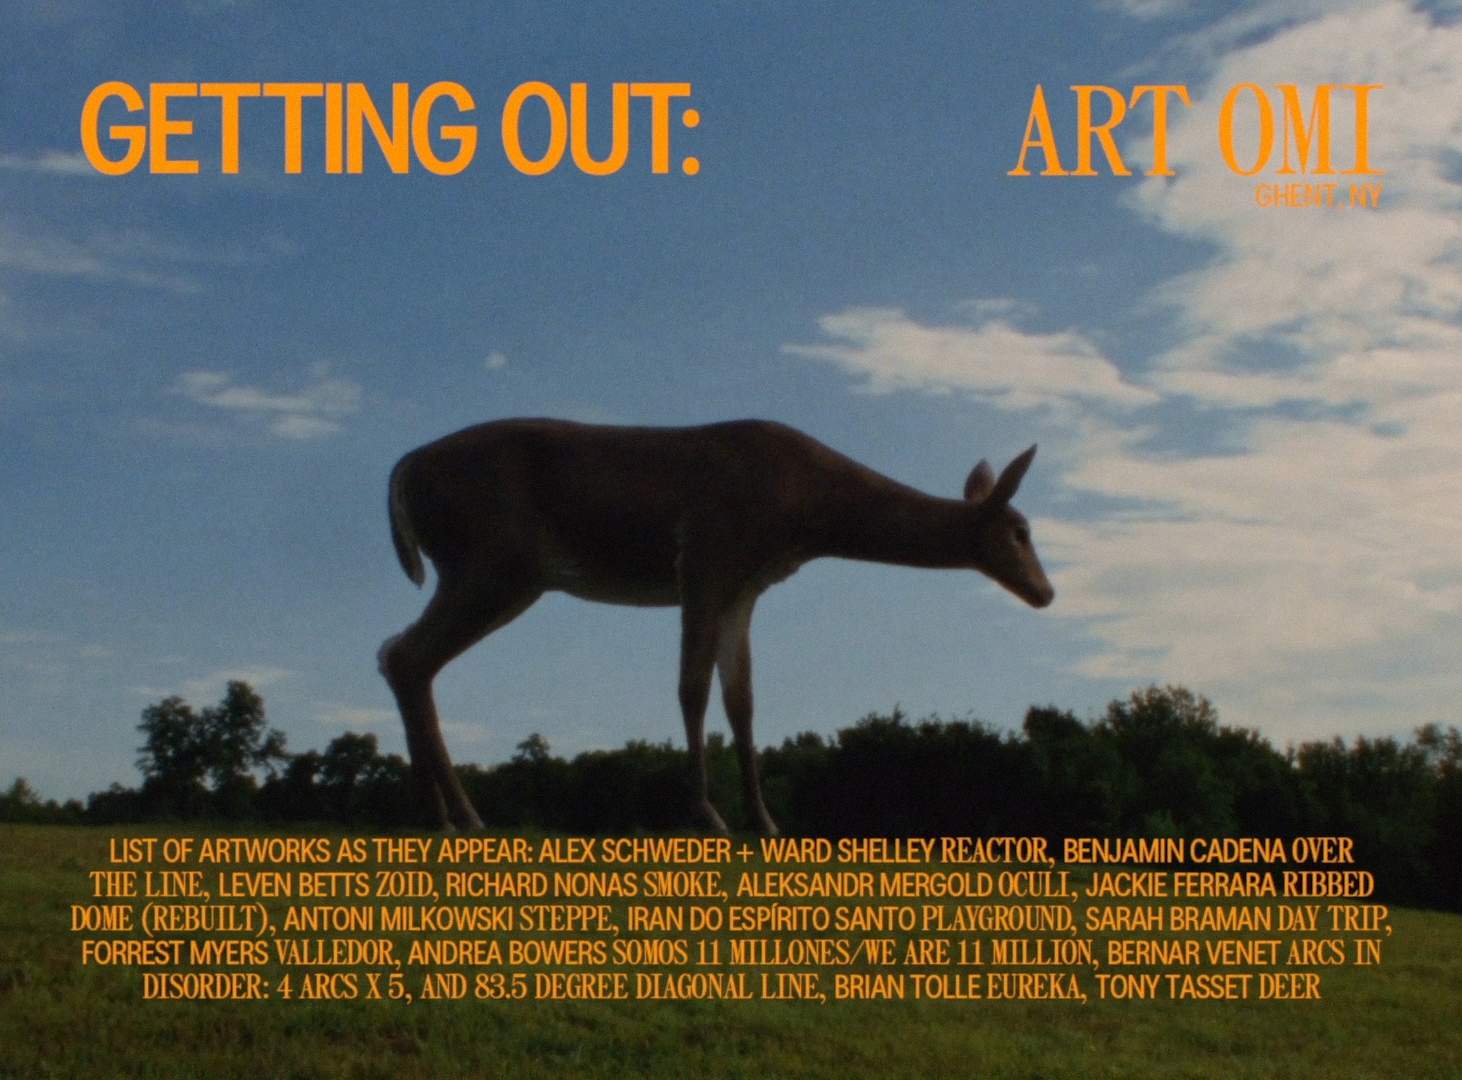 Document Journal "Getting Out" title cards